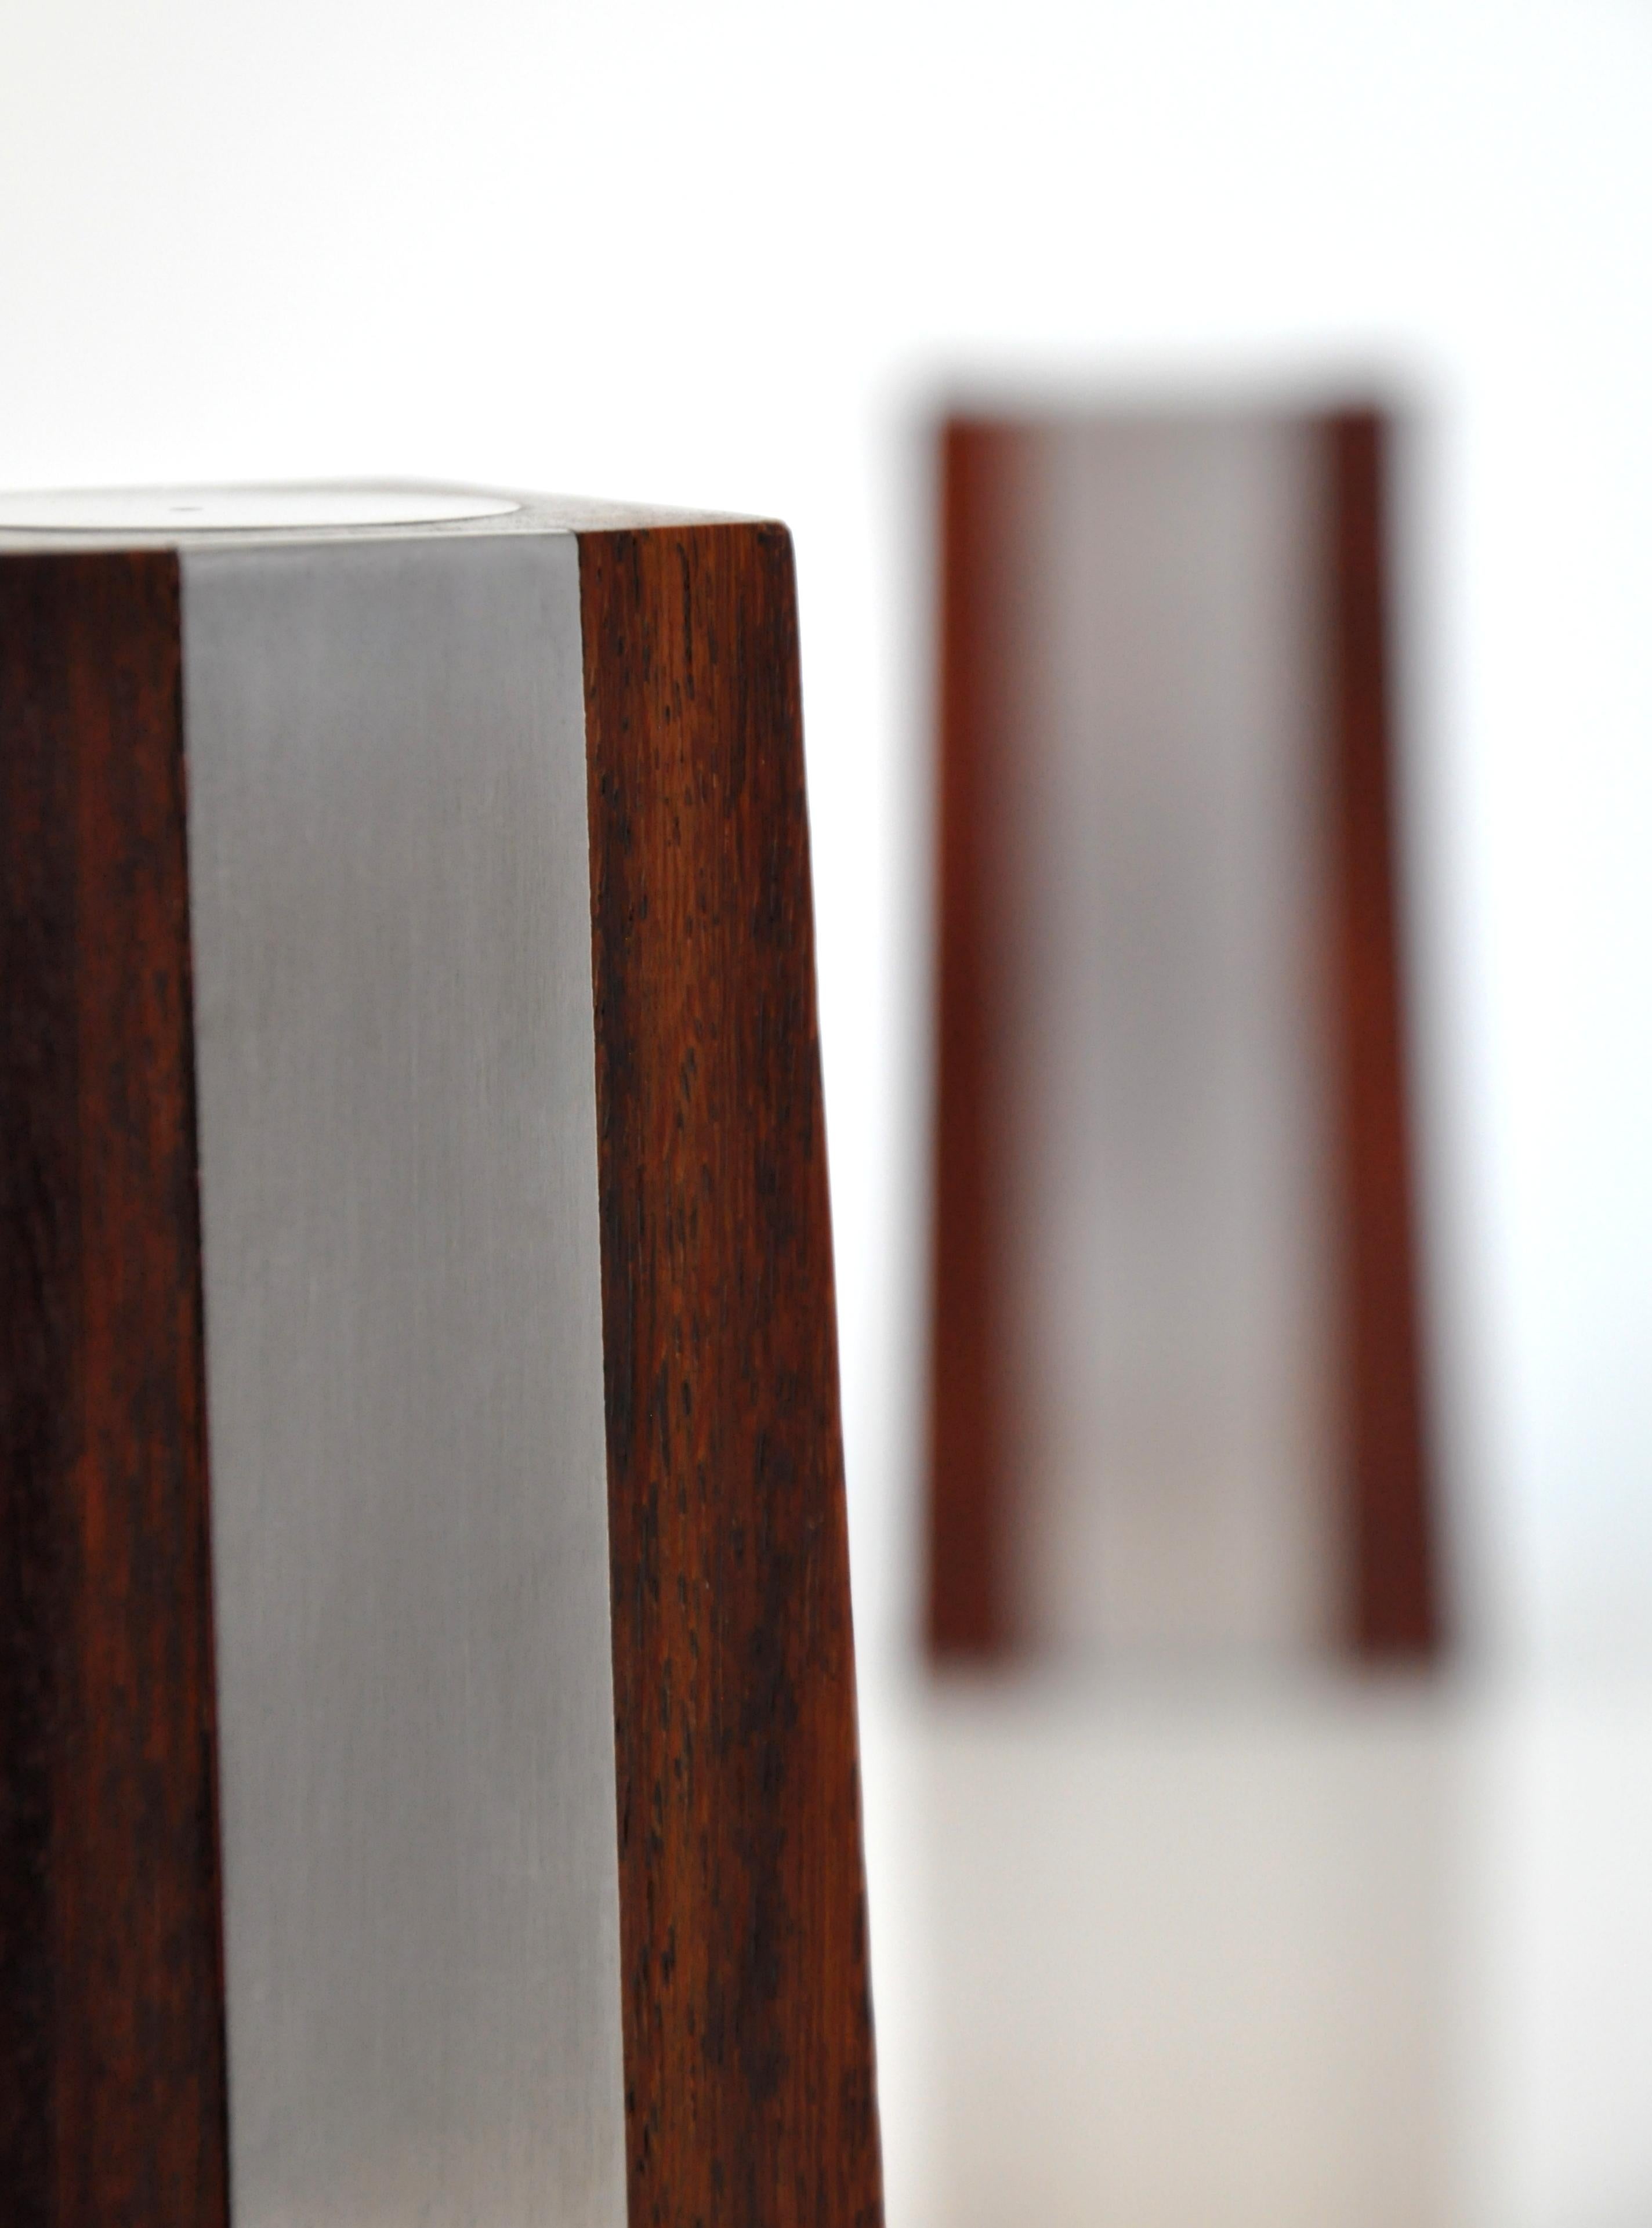 Vintage Danish obelisk shaped salt and pepper shakers. Rosewood with brushed steel accents, in the style of Paul Evans and Phillip Lloyd Powell.